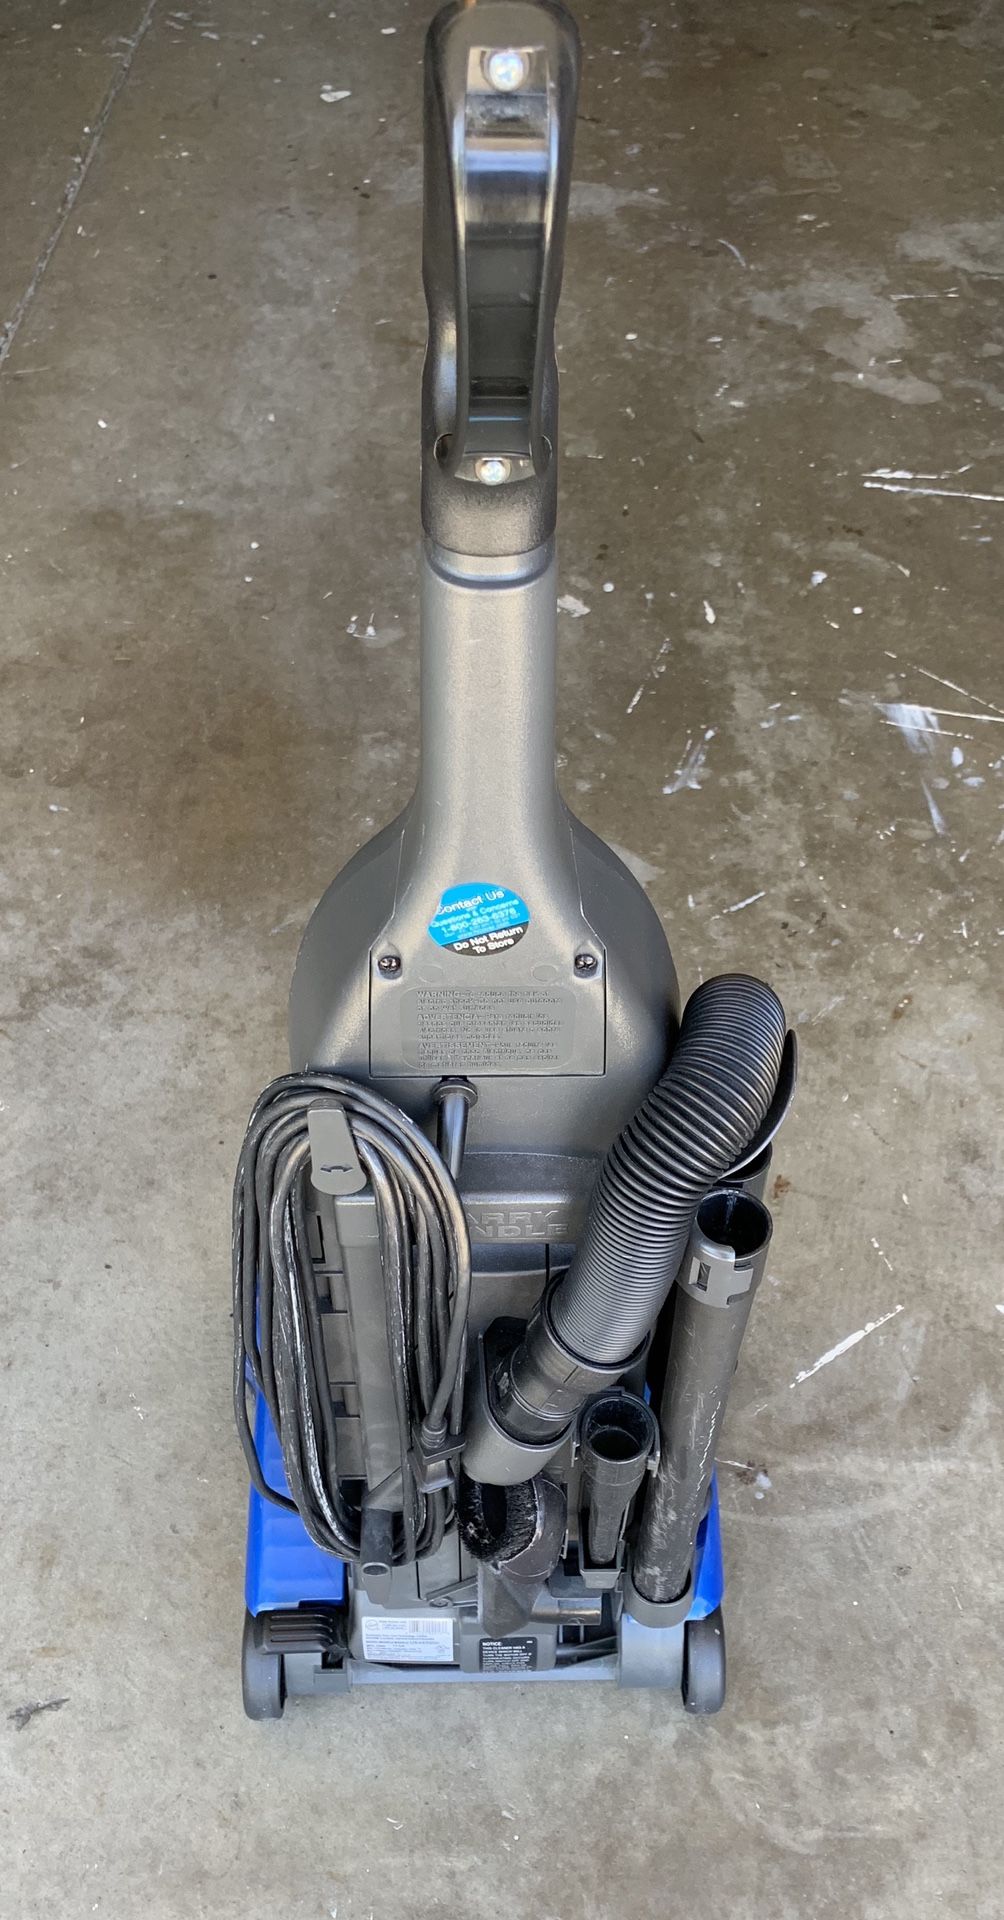 Hoover Windtunnel vacuum. Great condition.